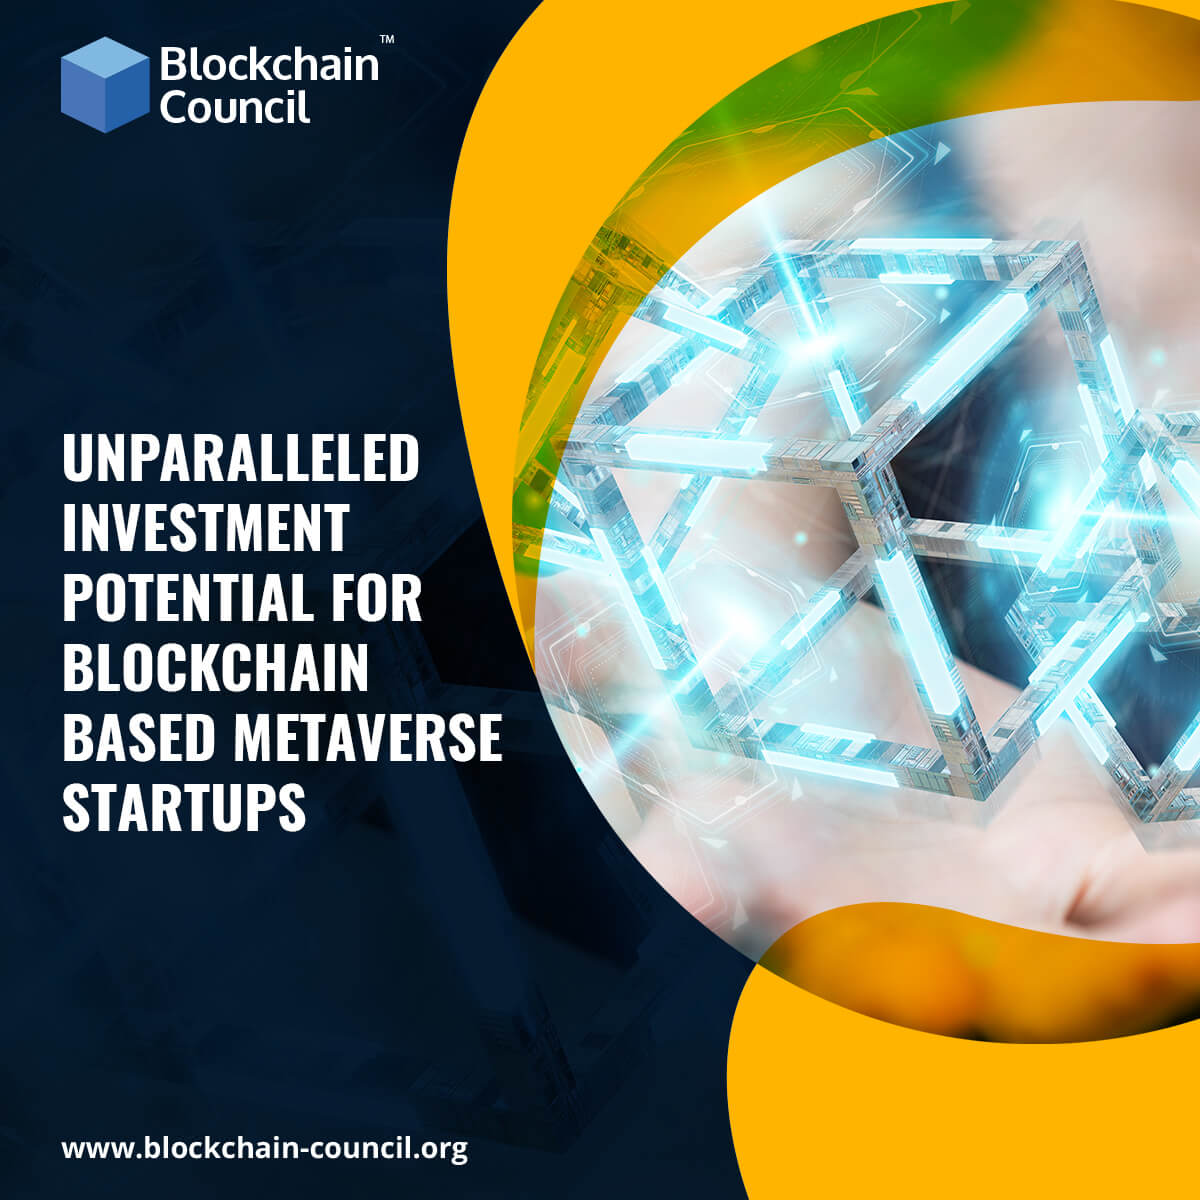 Unparalleled investment potential for Blockchain based metaverse startups